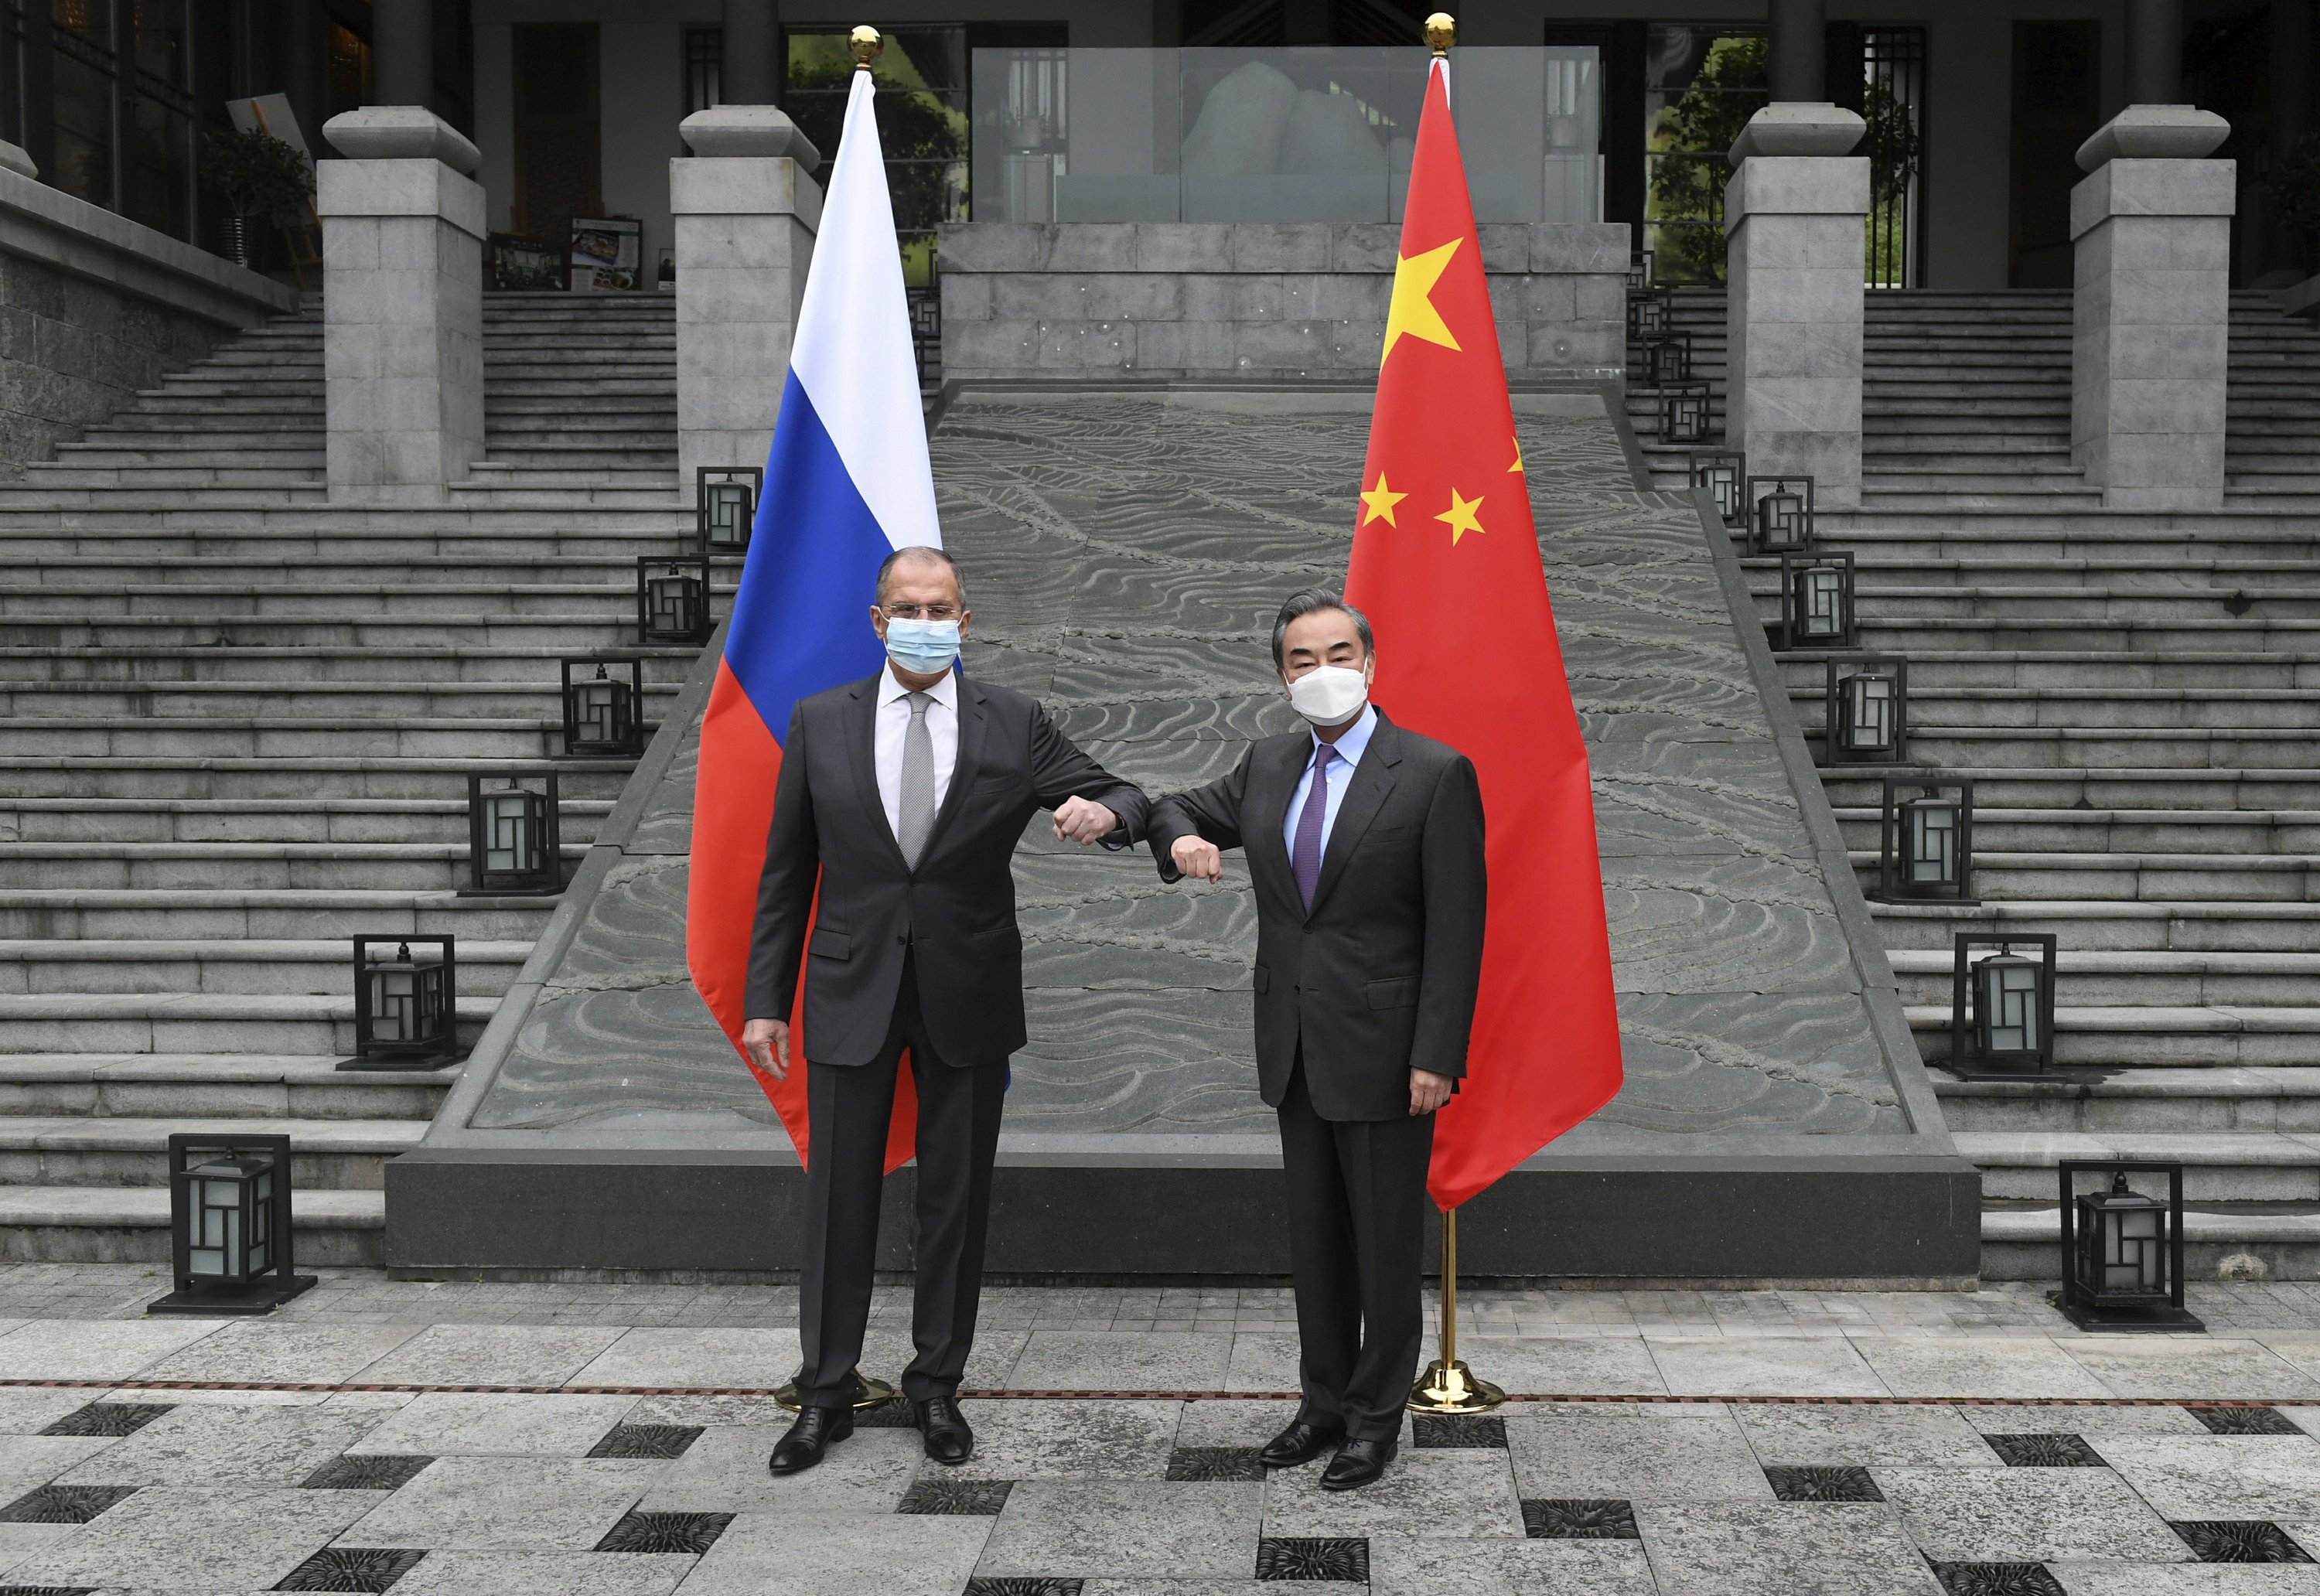 Officials from China and Russia meet to demonstrate unity against EU and US